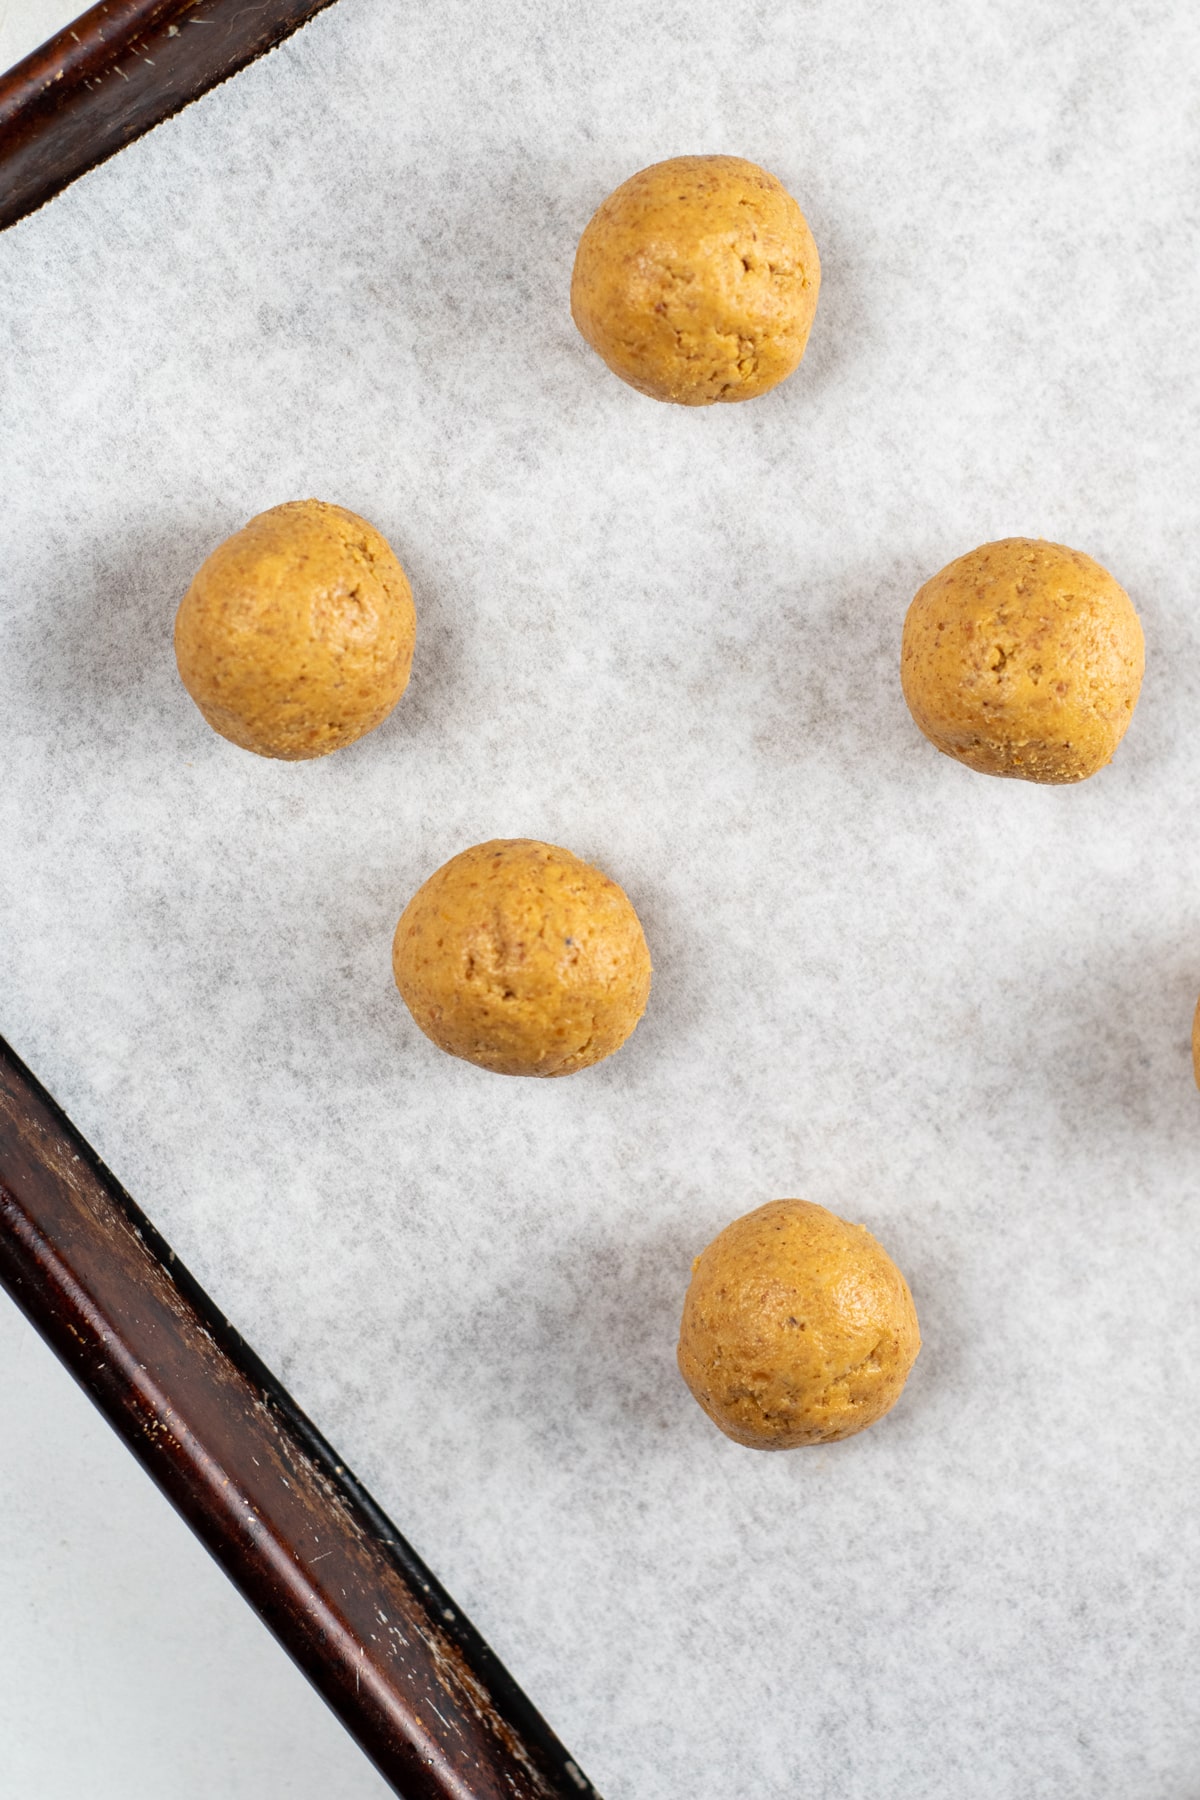 Next step for Pumpkin Truffles is to scoop out dough in 1 tablespoon scoops and roll into balls, placing on the prepared baking sheet until all of the dough is in balls.